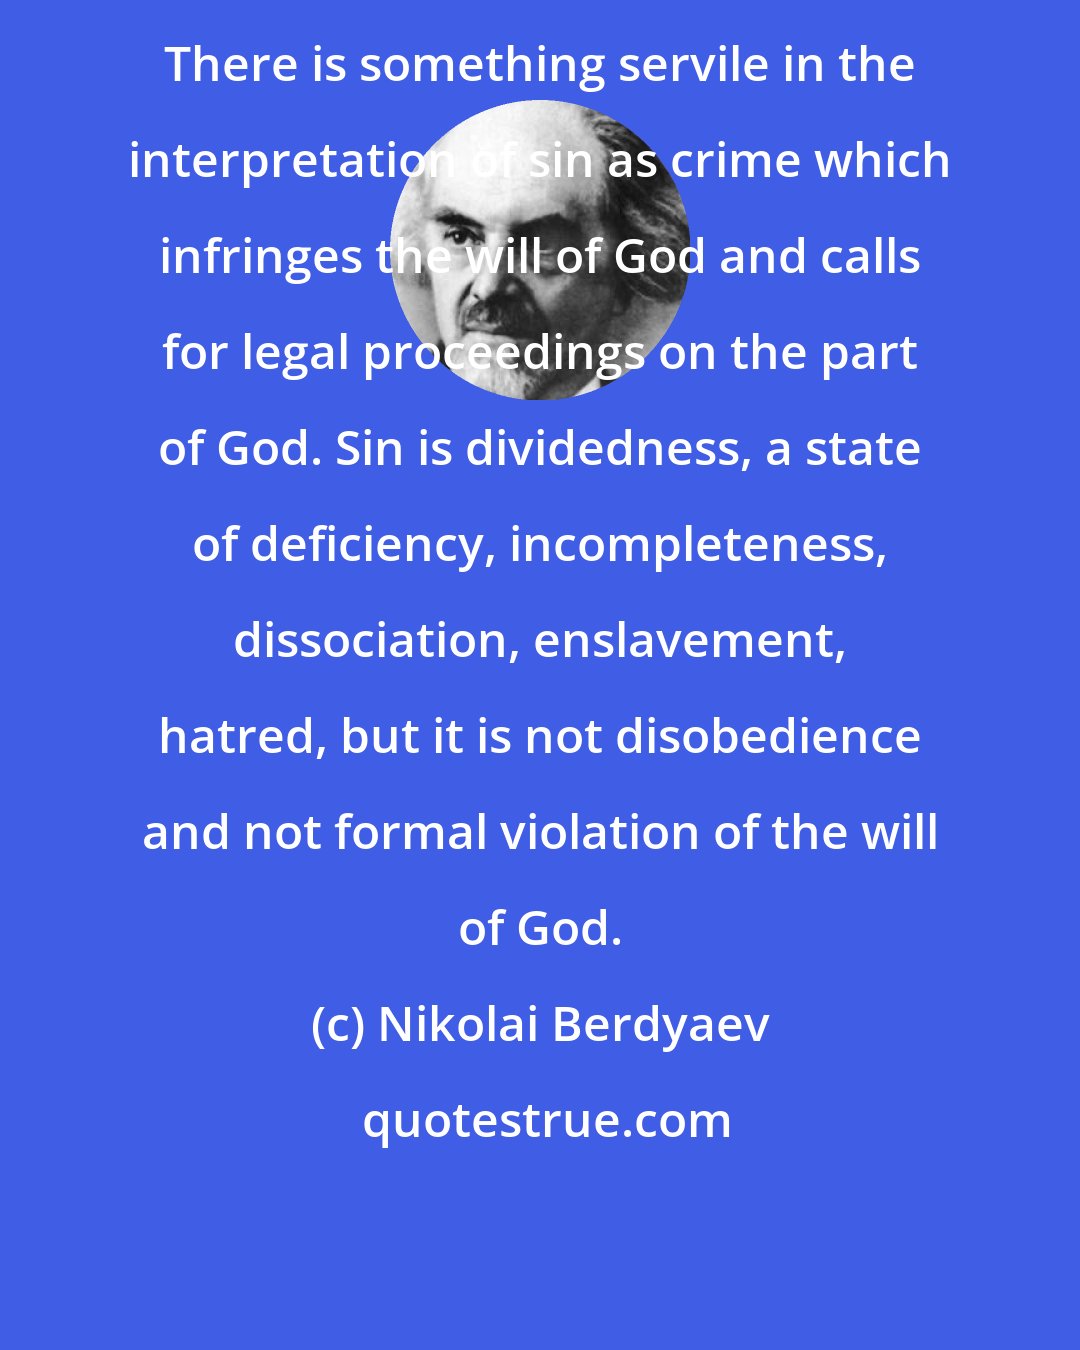 Nikolai Berdyaev: There is something servile in the interpretation of sin as crime which infringes the will of God and calls for legal proceedings on the part of God. Sin is dividedness, a state of deficiency, incompleteness, dissociation, enslavement, hatred, but it is not disobedience and not formal violation of the will of God.